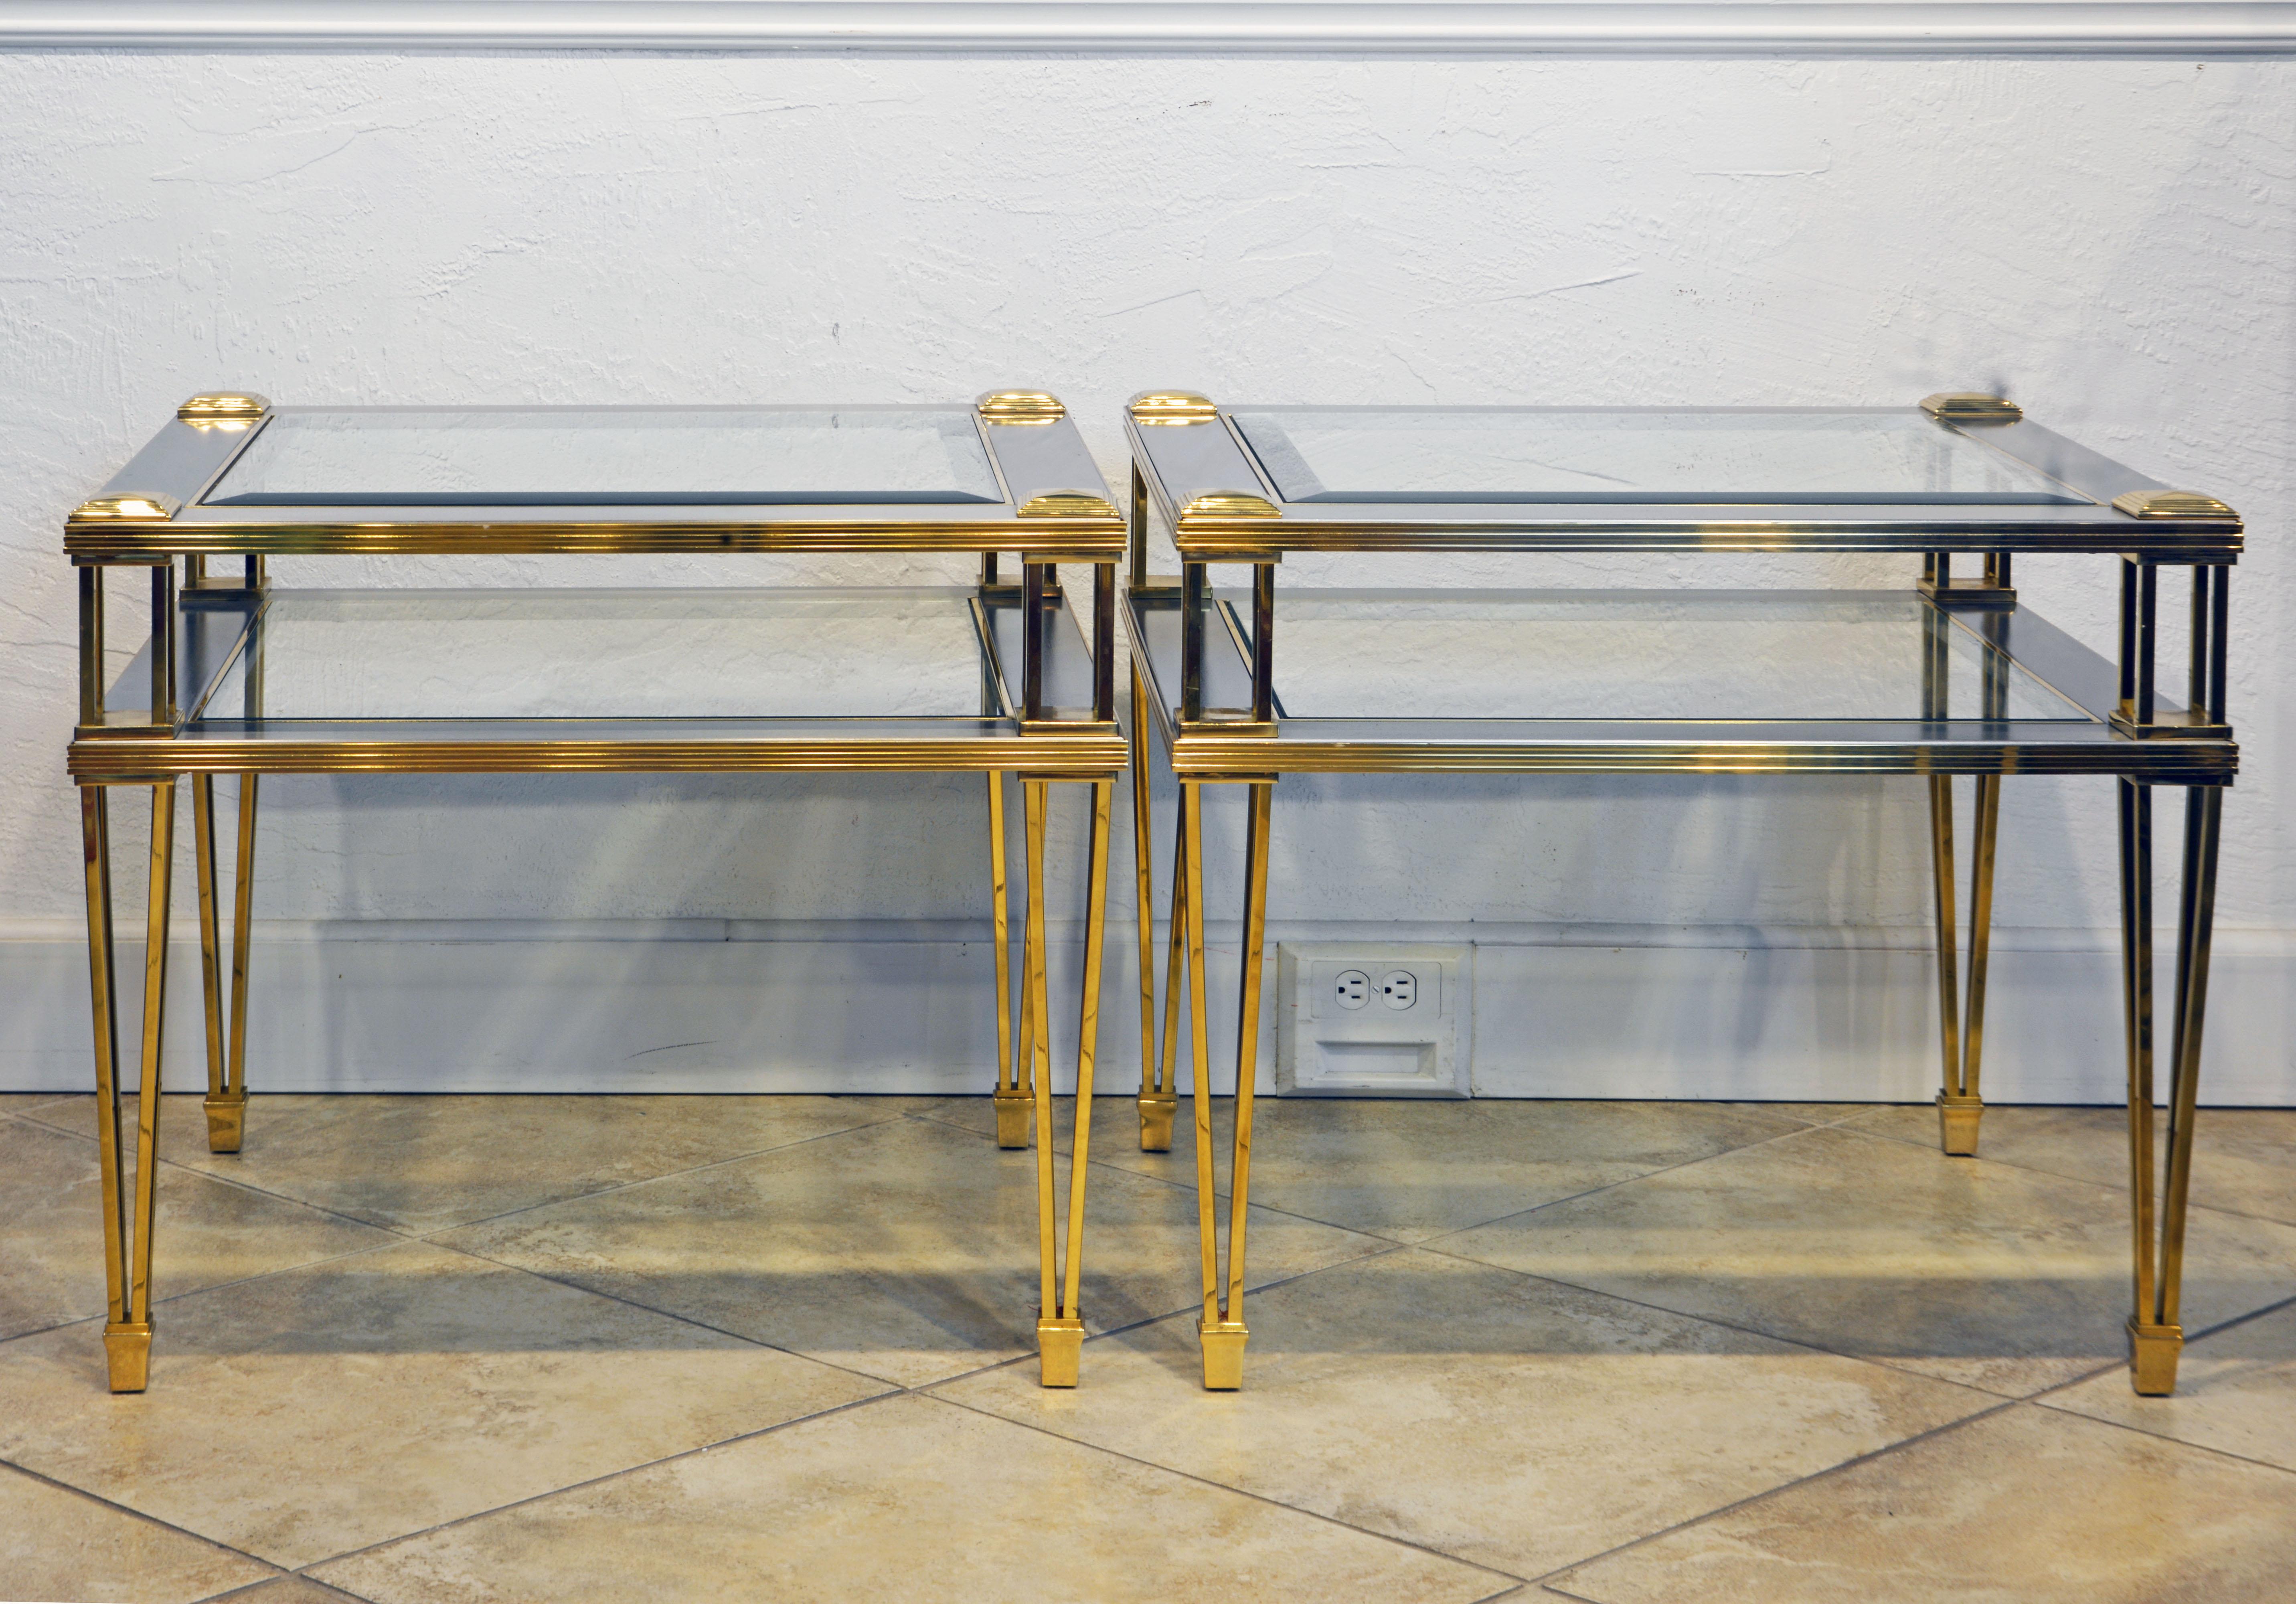 These elegant two-tier Maison Jansen style tables feature brass rod skeleton frames, brushed steel panels with beveled glass tops and under tiers. The combination of the brass and steel in a modern design is stunning.